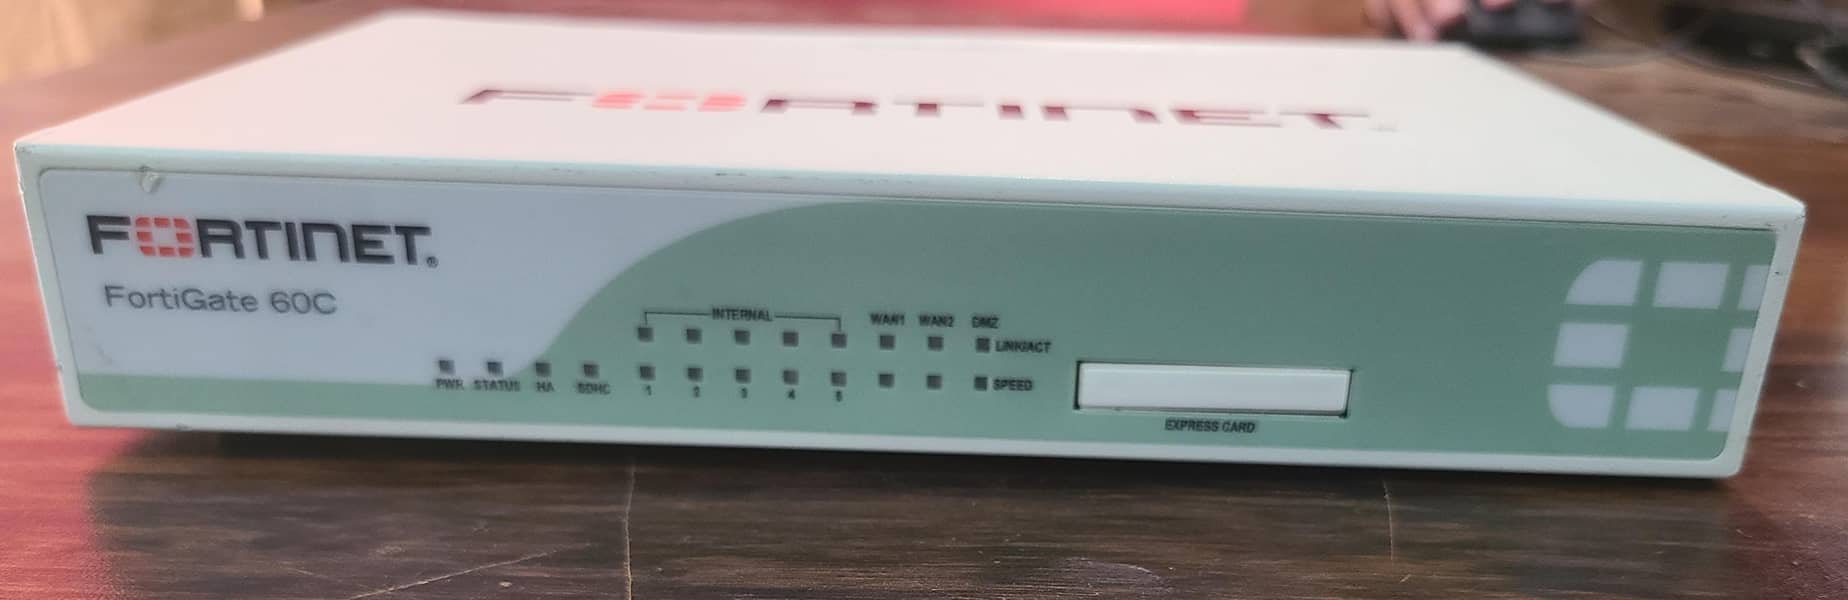 Fortinet/Fortigate/FG-60C/Firewall/Security/Appliances(Branded Used) 3